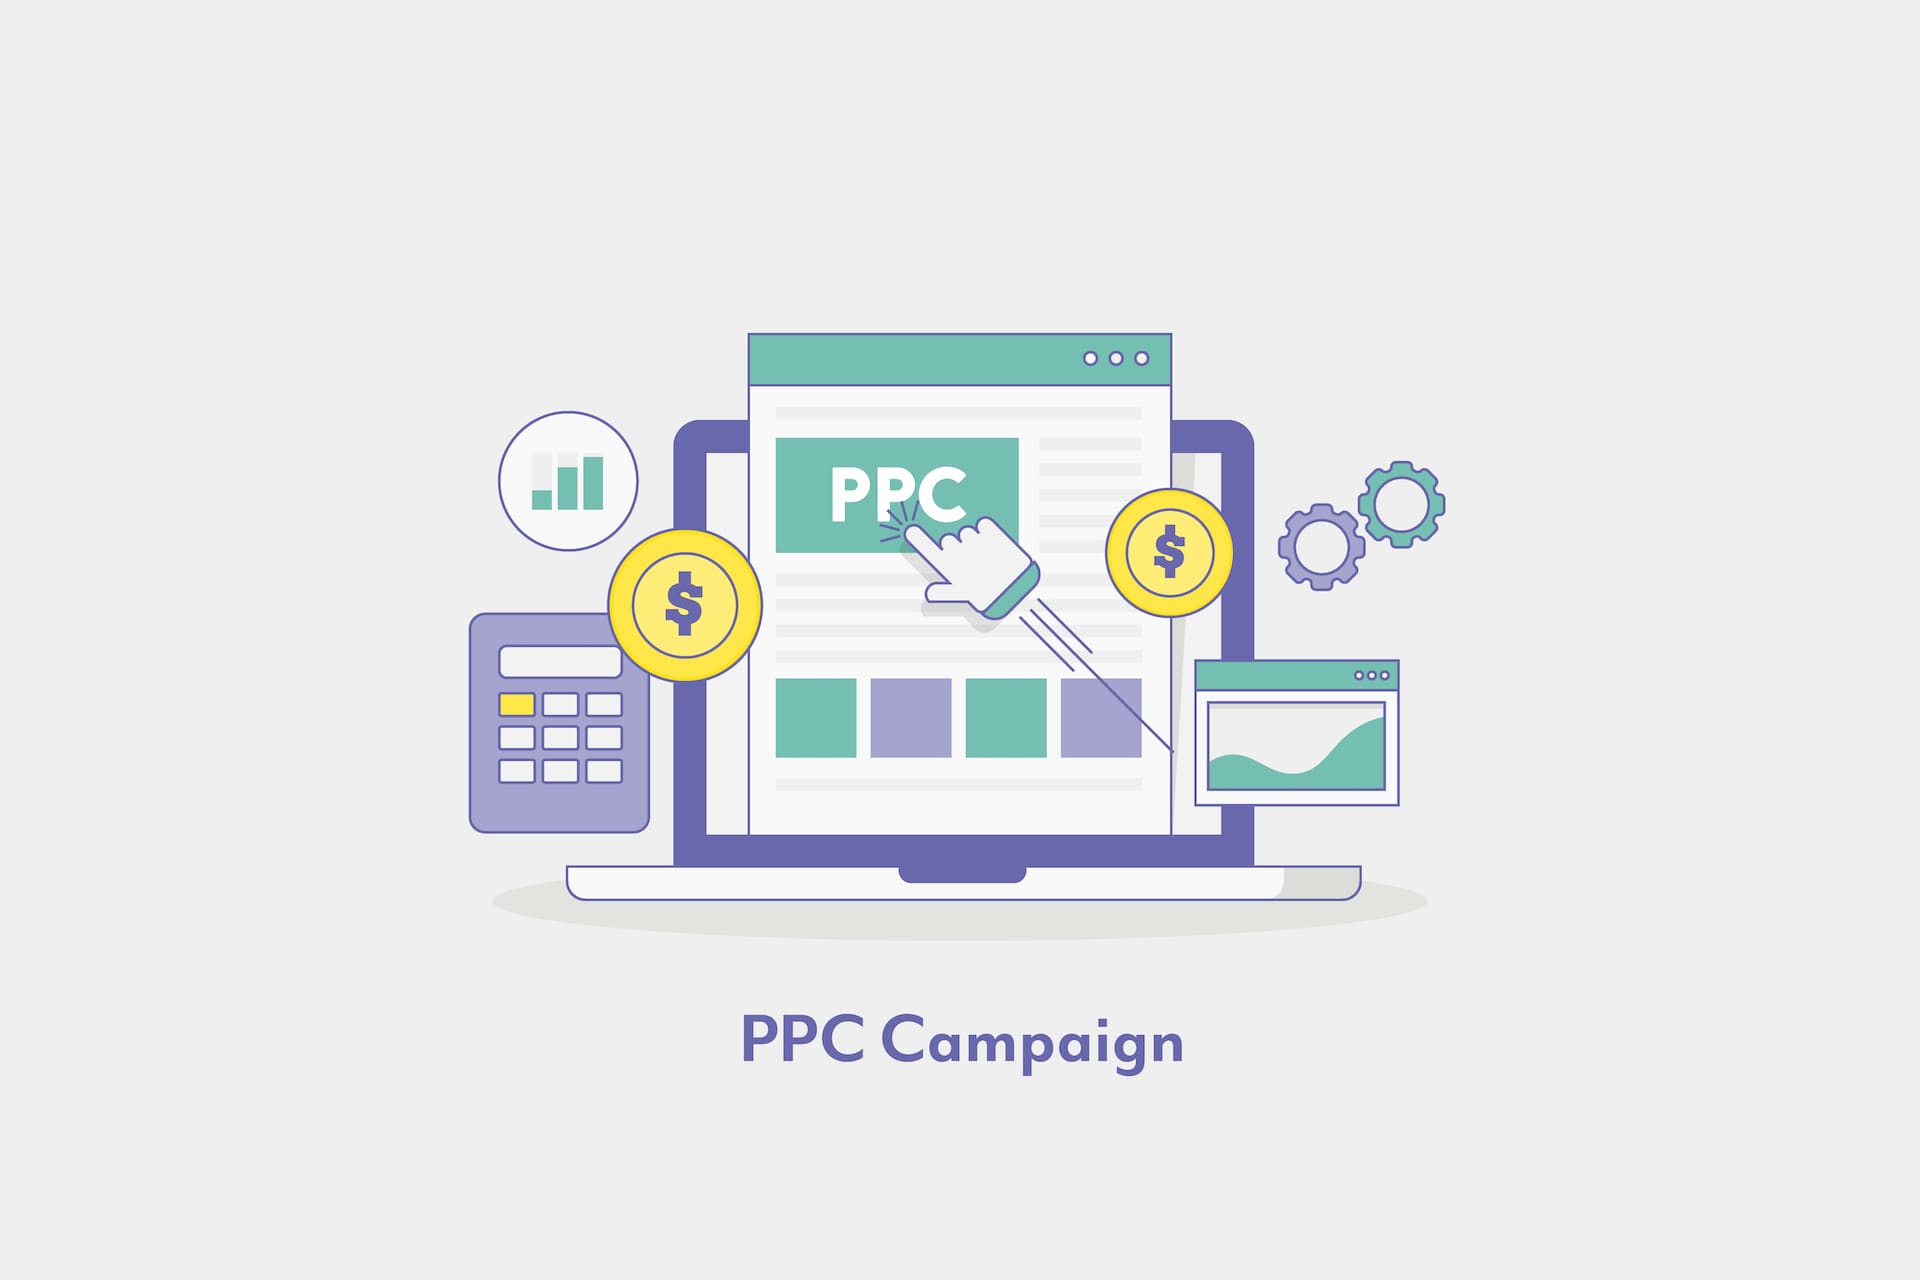 Misconceptions about PPC and Google Ads